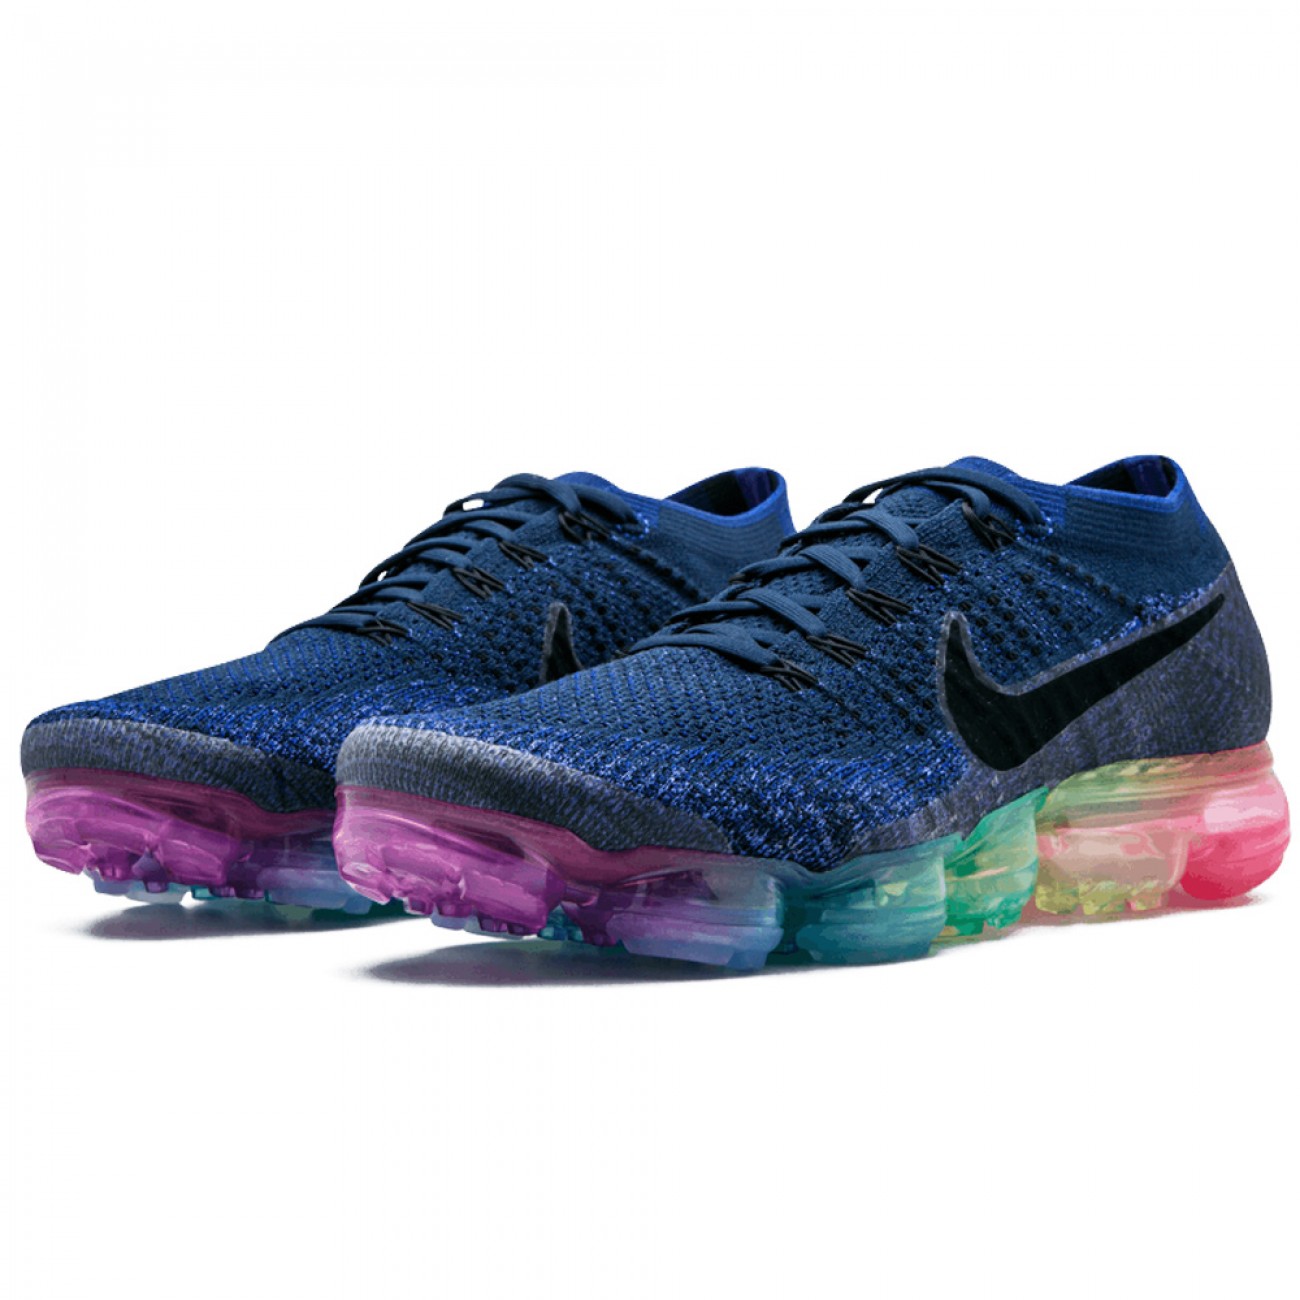 NIKE AIR VAPORMAX FLYKNIT BETRUE TO EQUALITY 2017